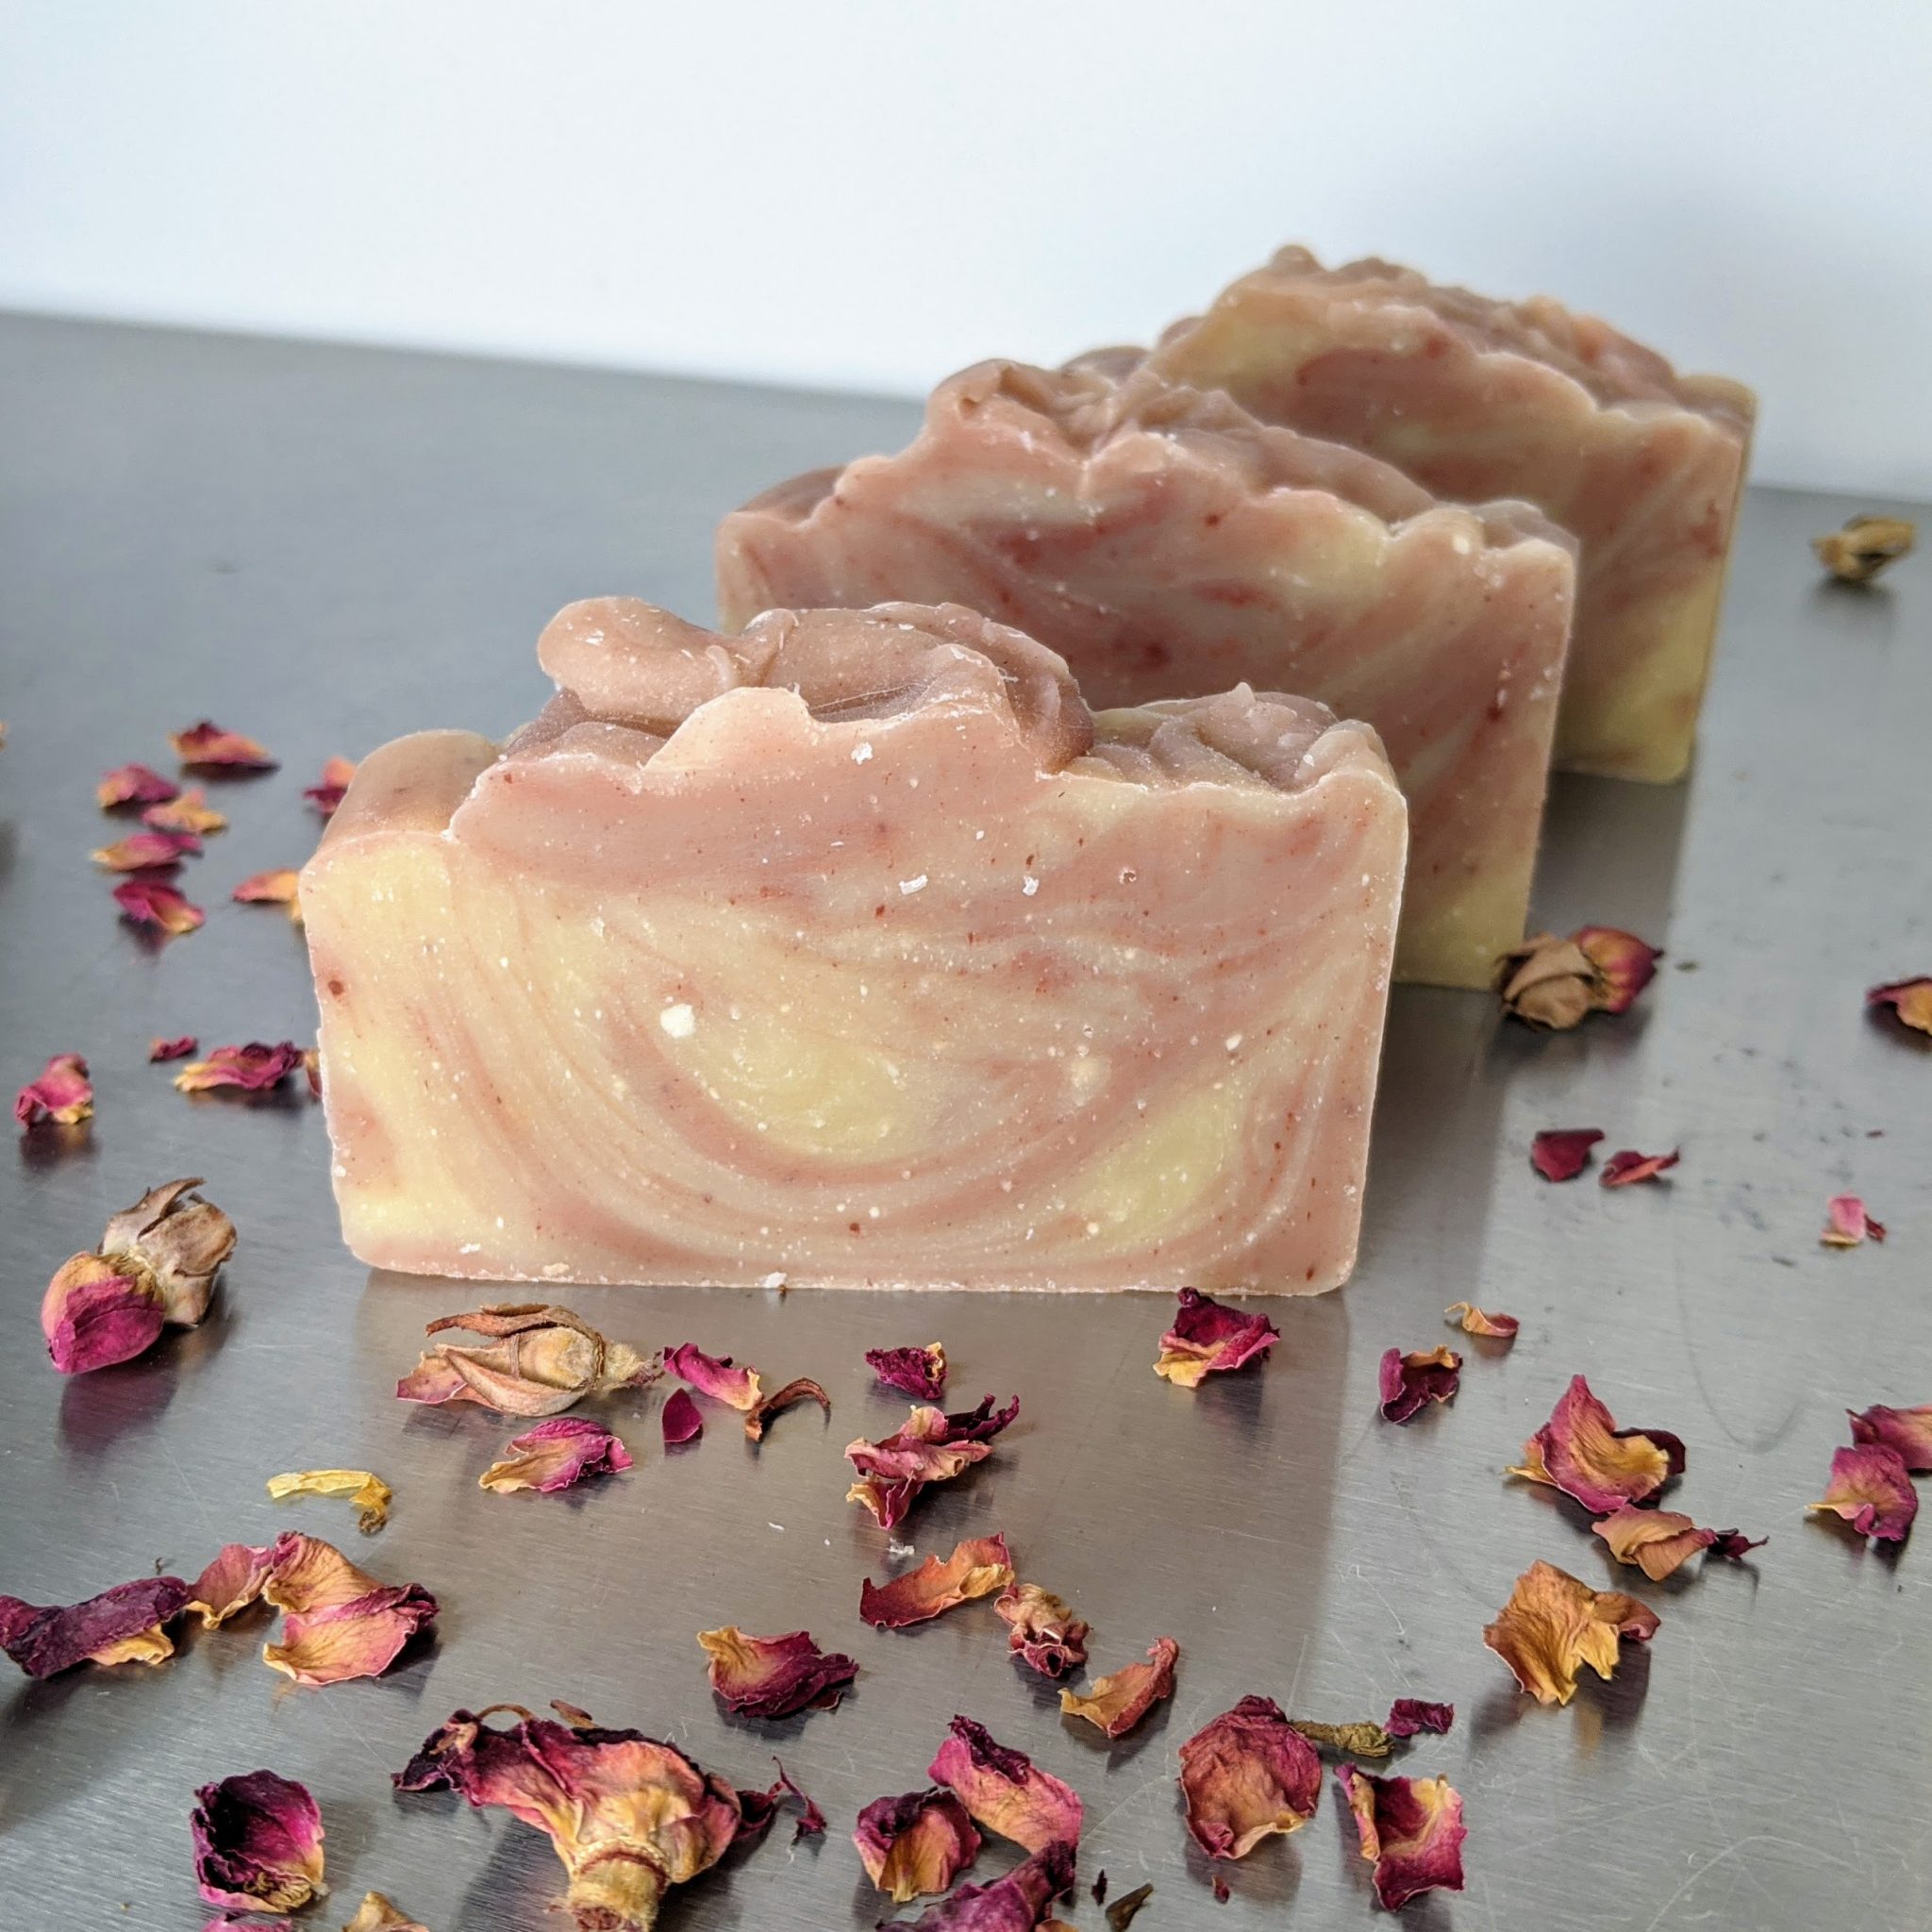 Pine Resin-Infused Soaps